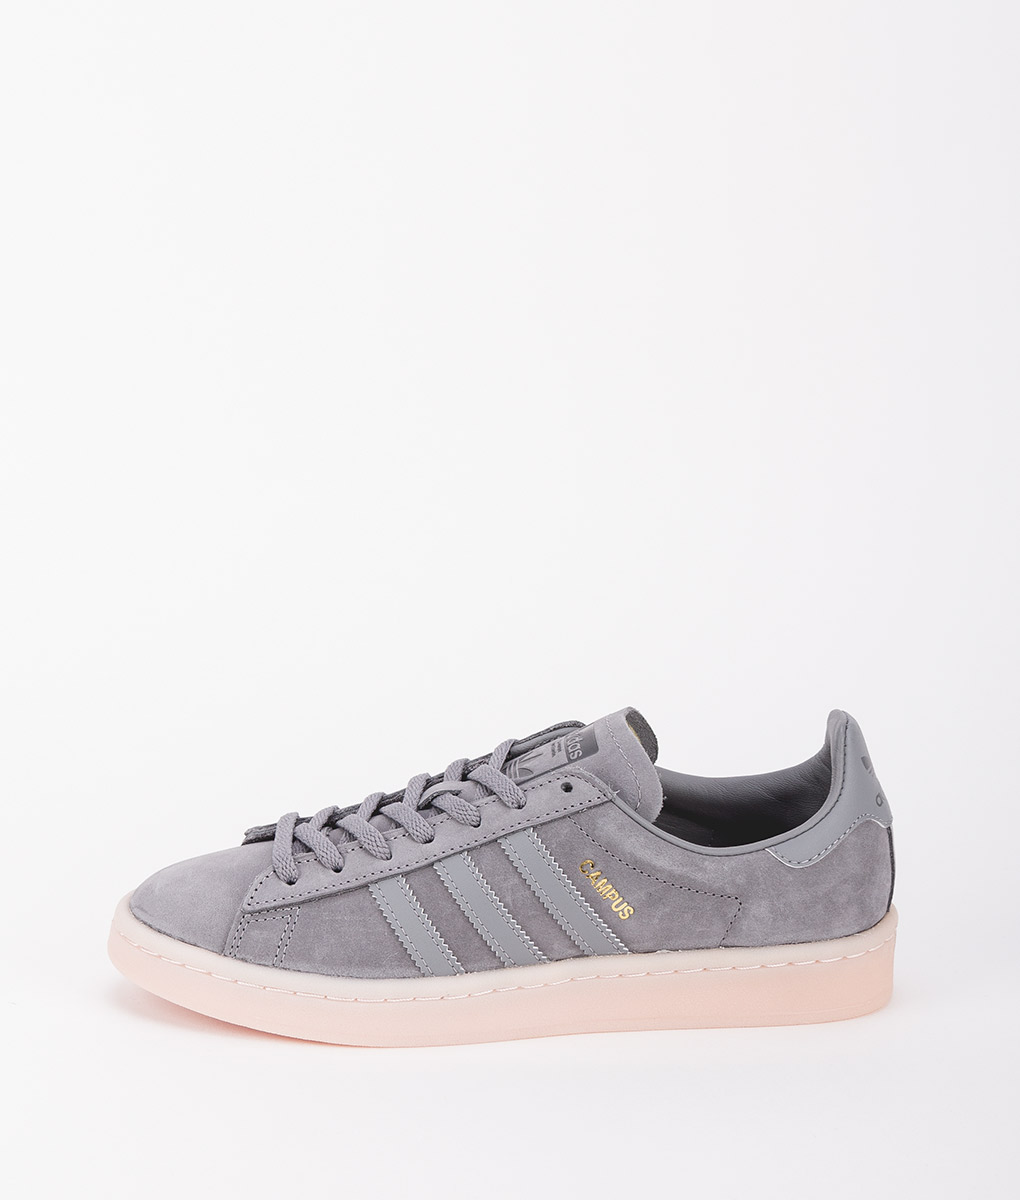 Sneakers BY9838 CAMPUS, Grey 99.99 | T6/8